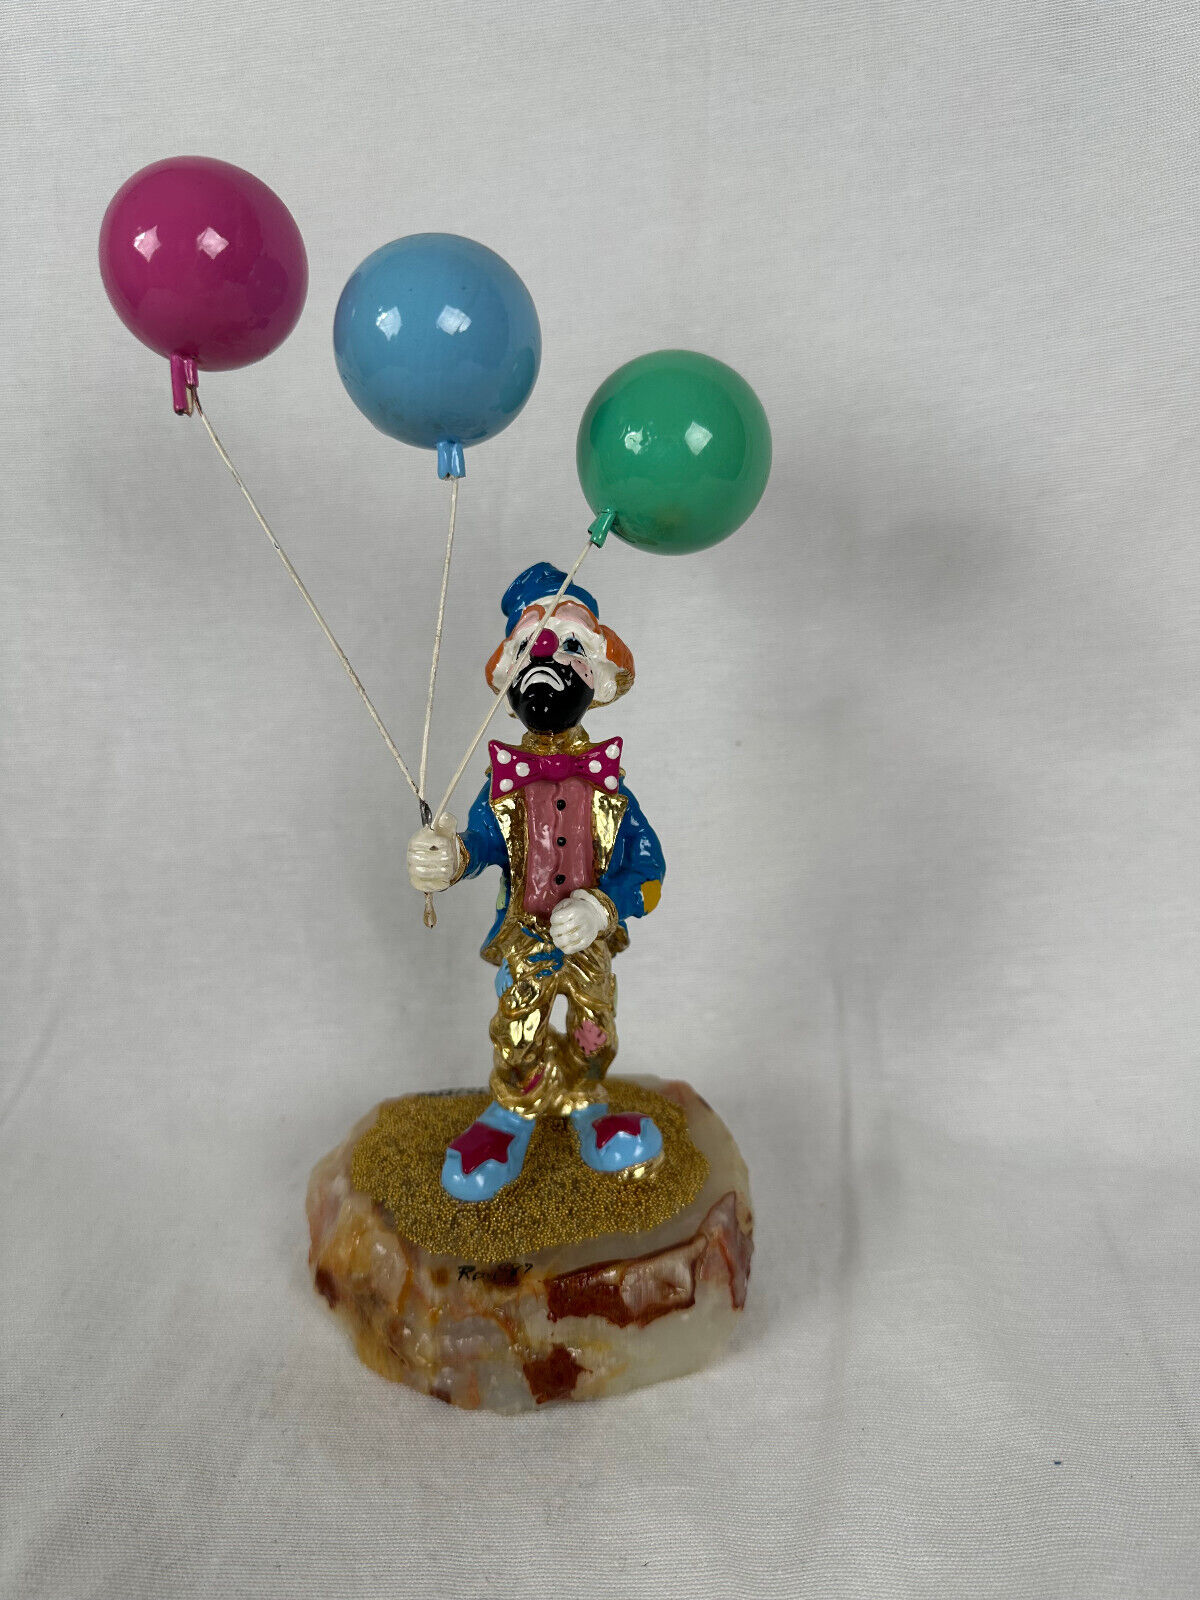 Vintage 1989 Ron Lee Metal Clown Sculpture Holding 3 Balloons Signed & Numbered